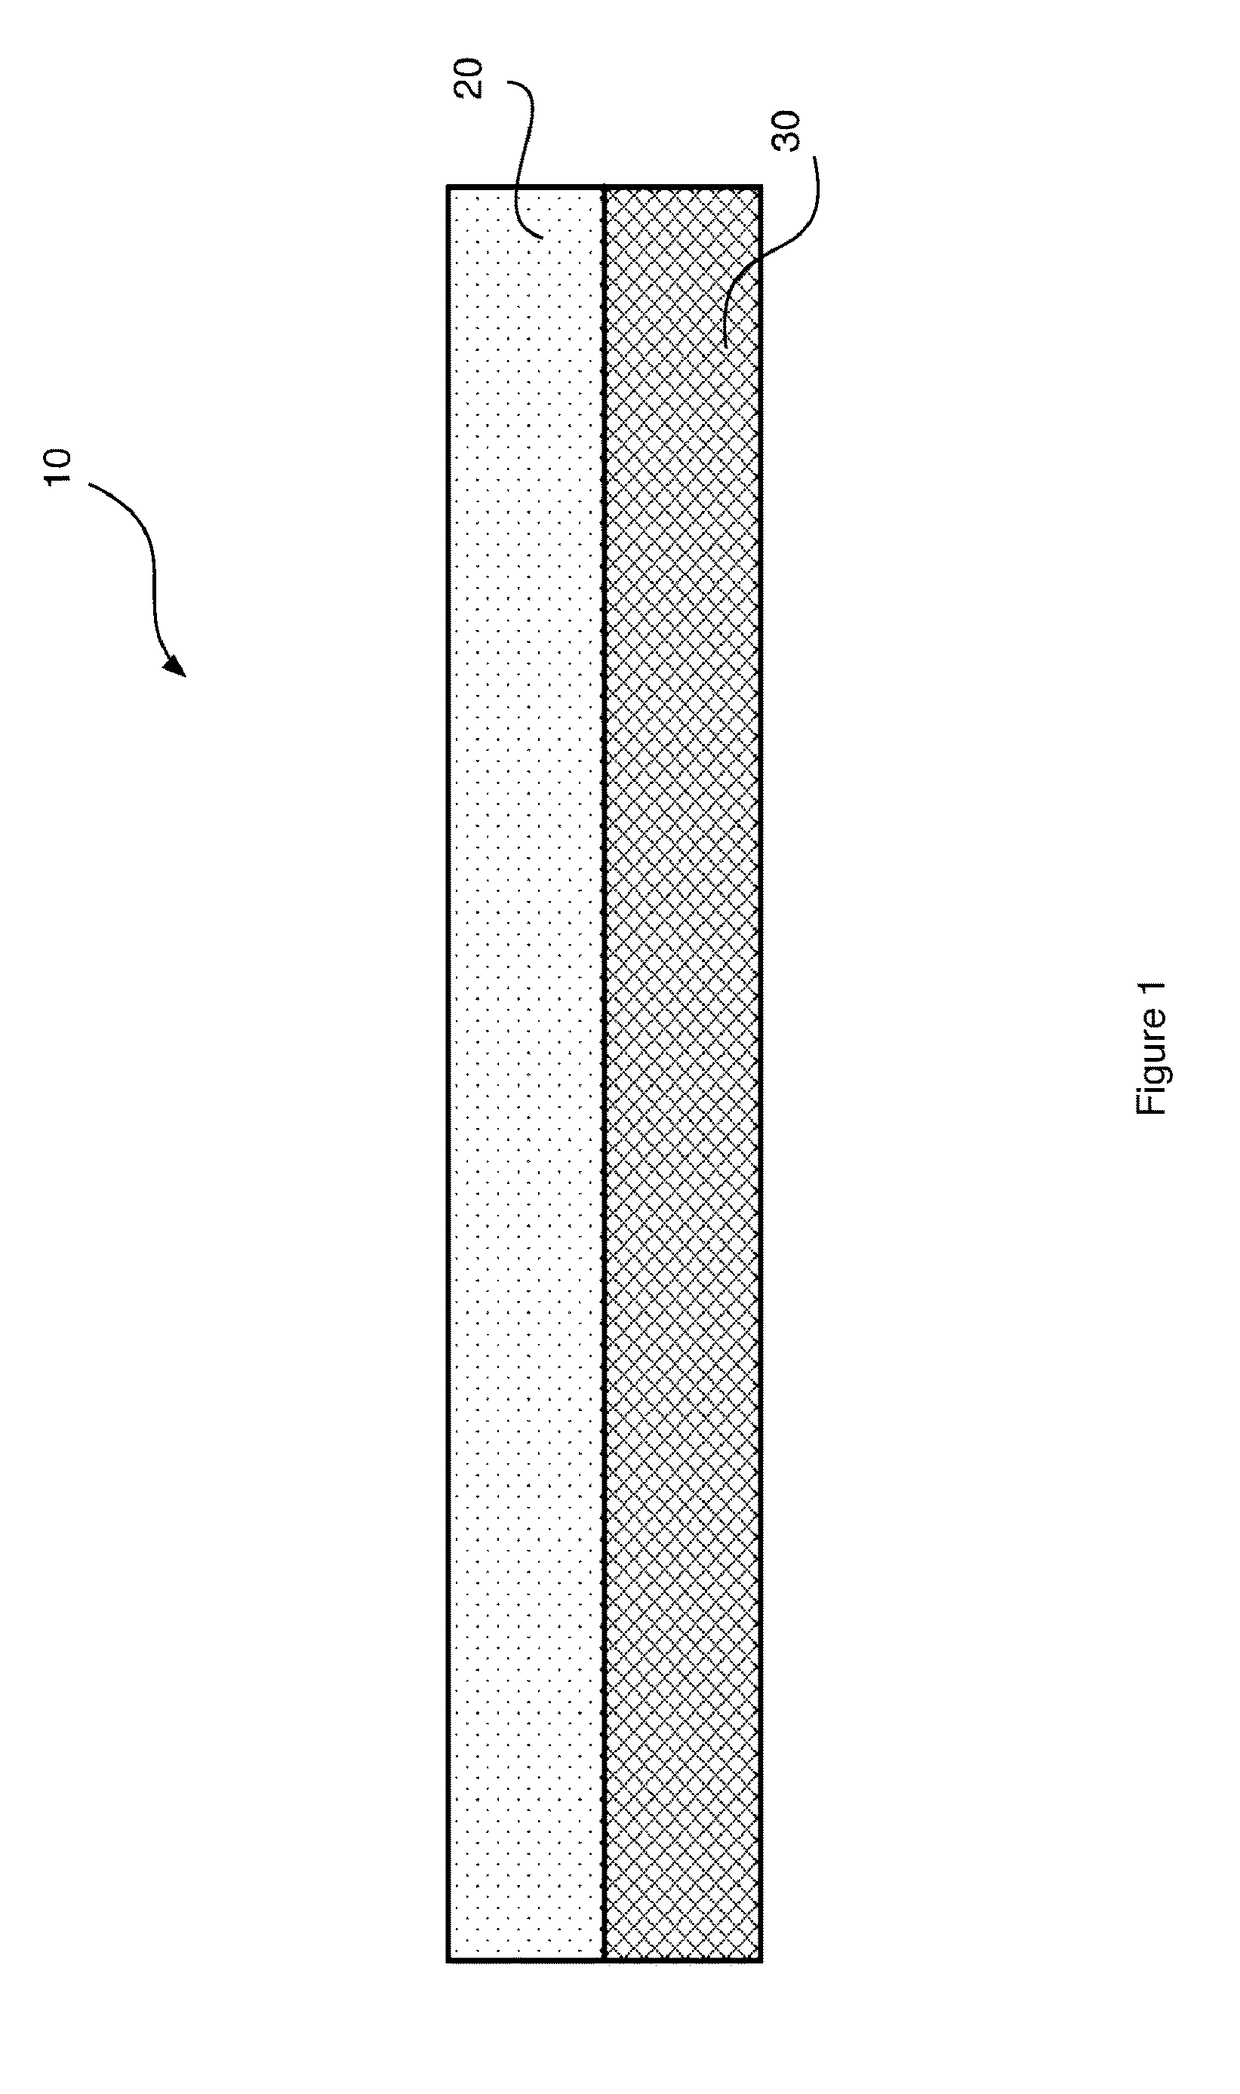 An abrasion resistant material and method of construction